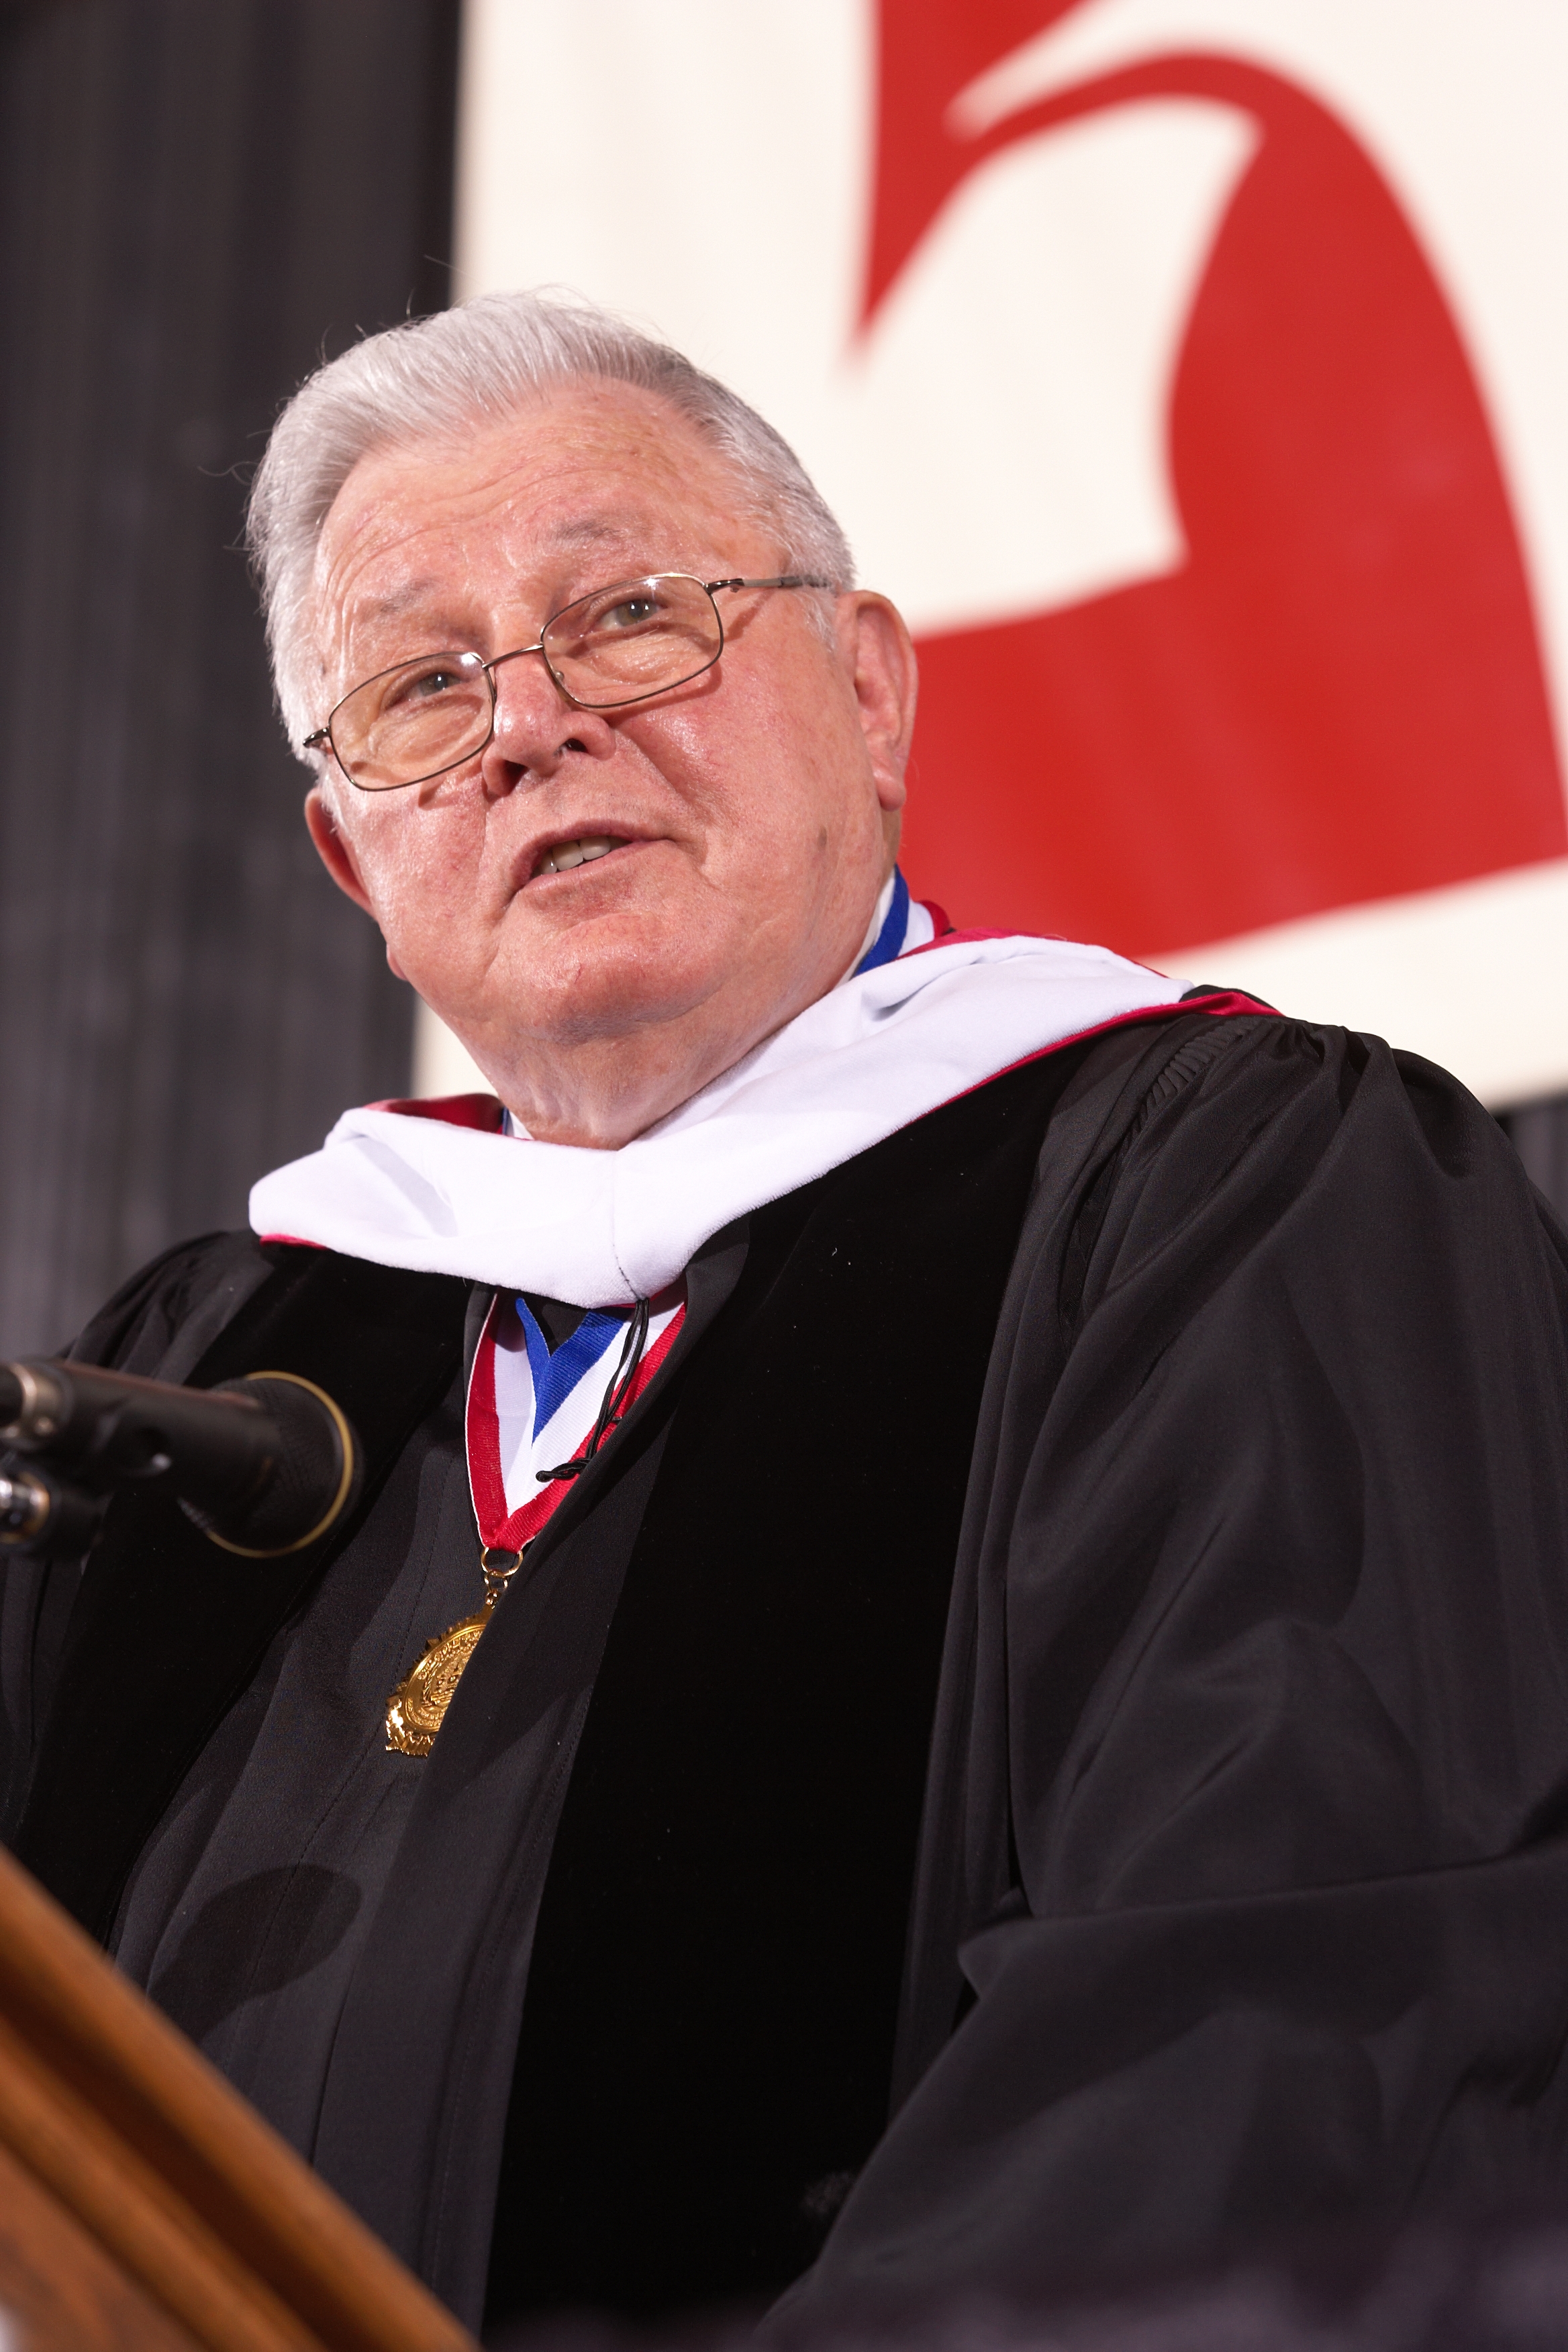 Dr. Don Huffman, photo by Central College